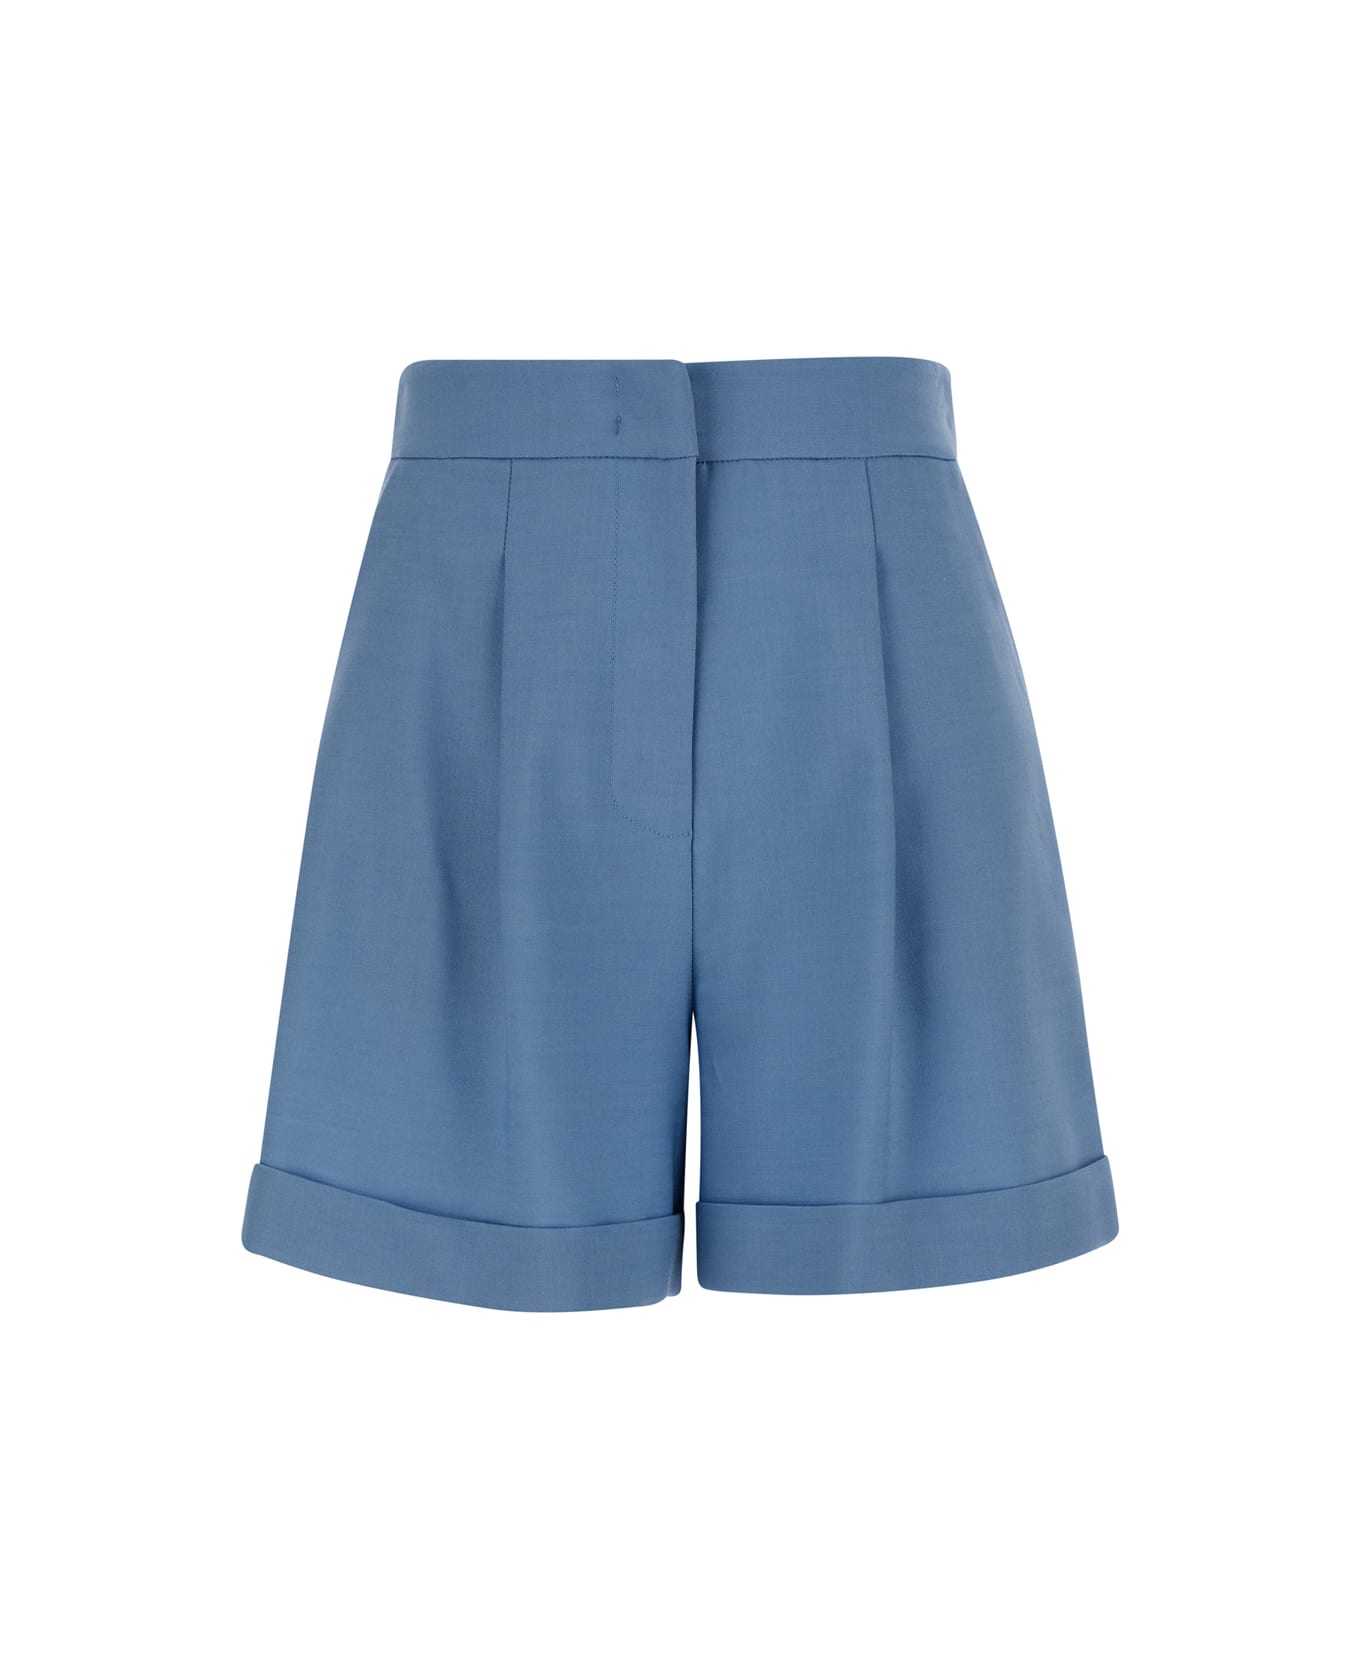 Federica Tosi Light Blue Pleated Shorts In Wool Blend Woman - Blu ショートパンツ